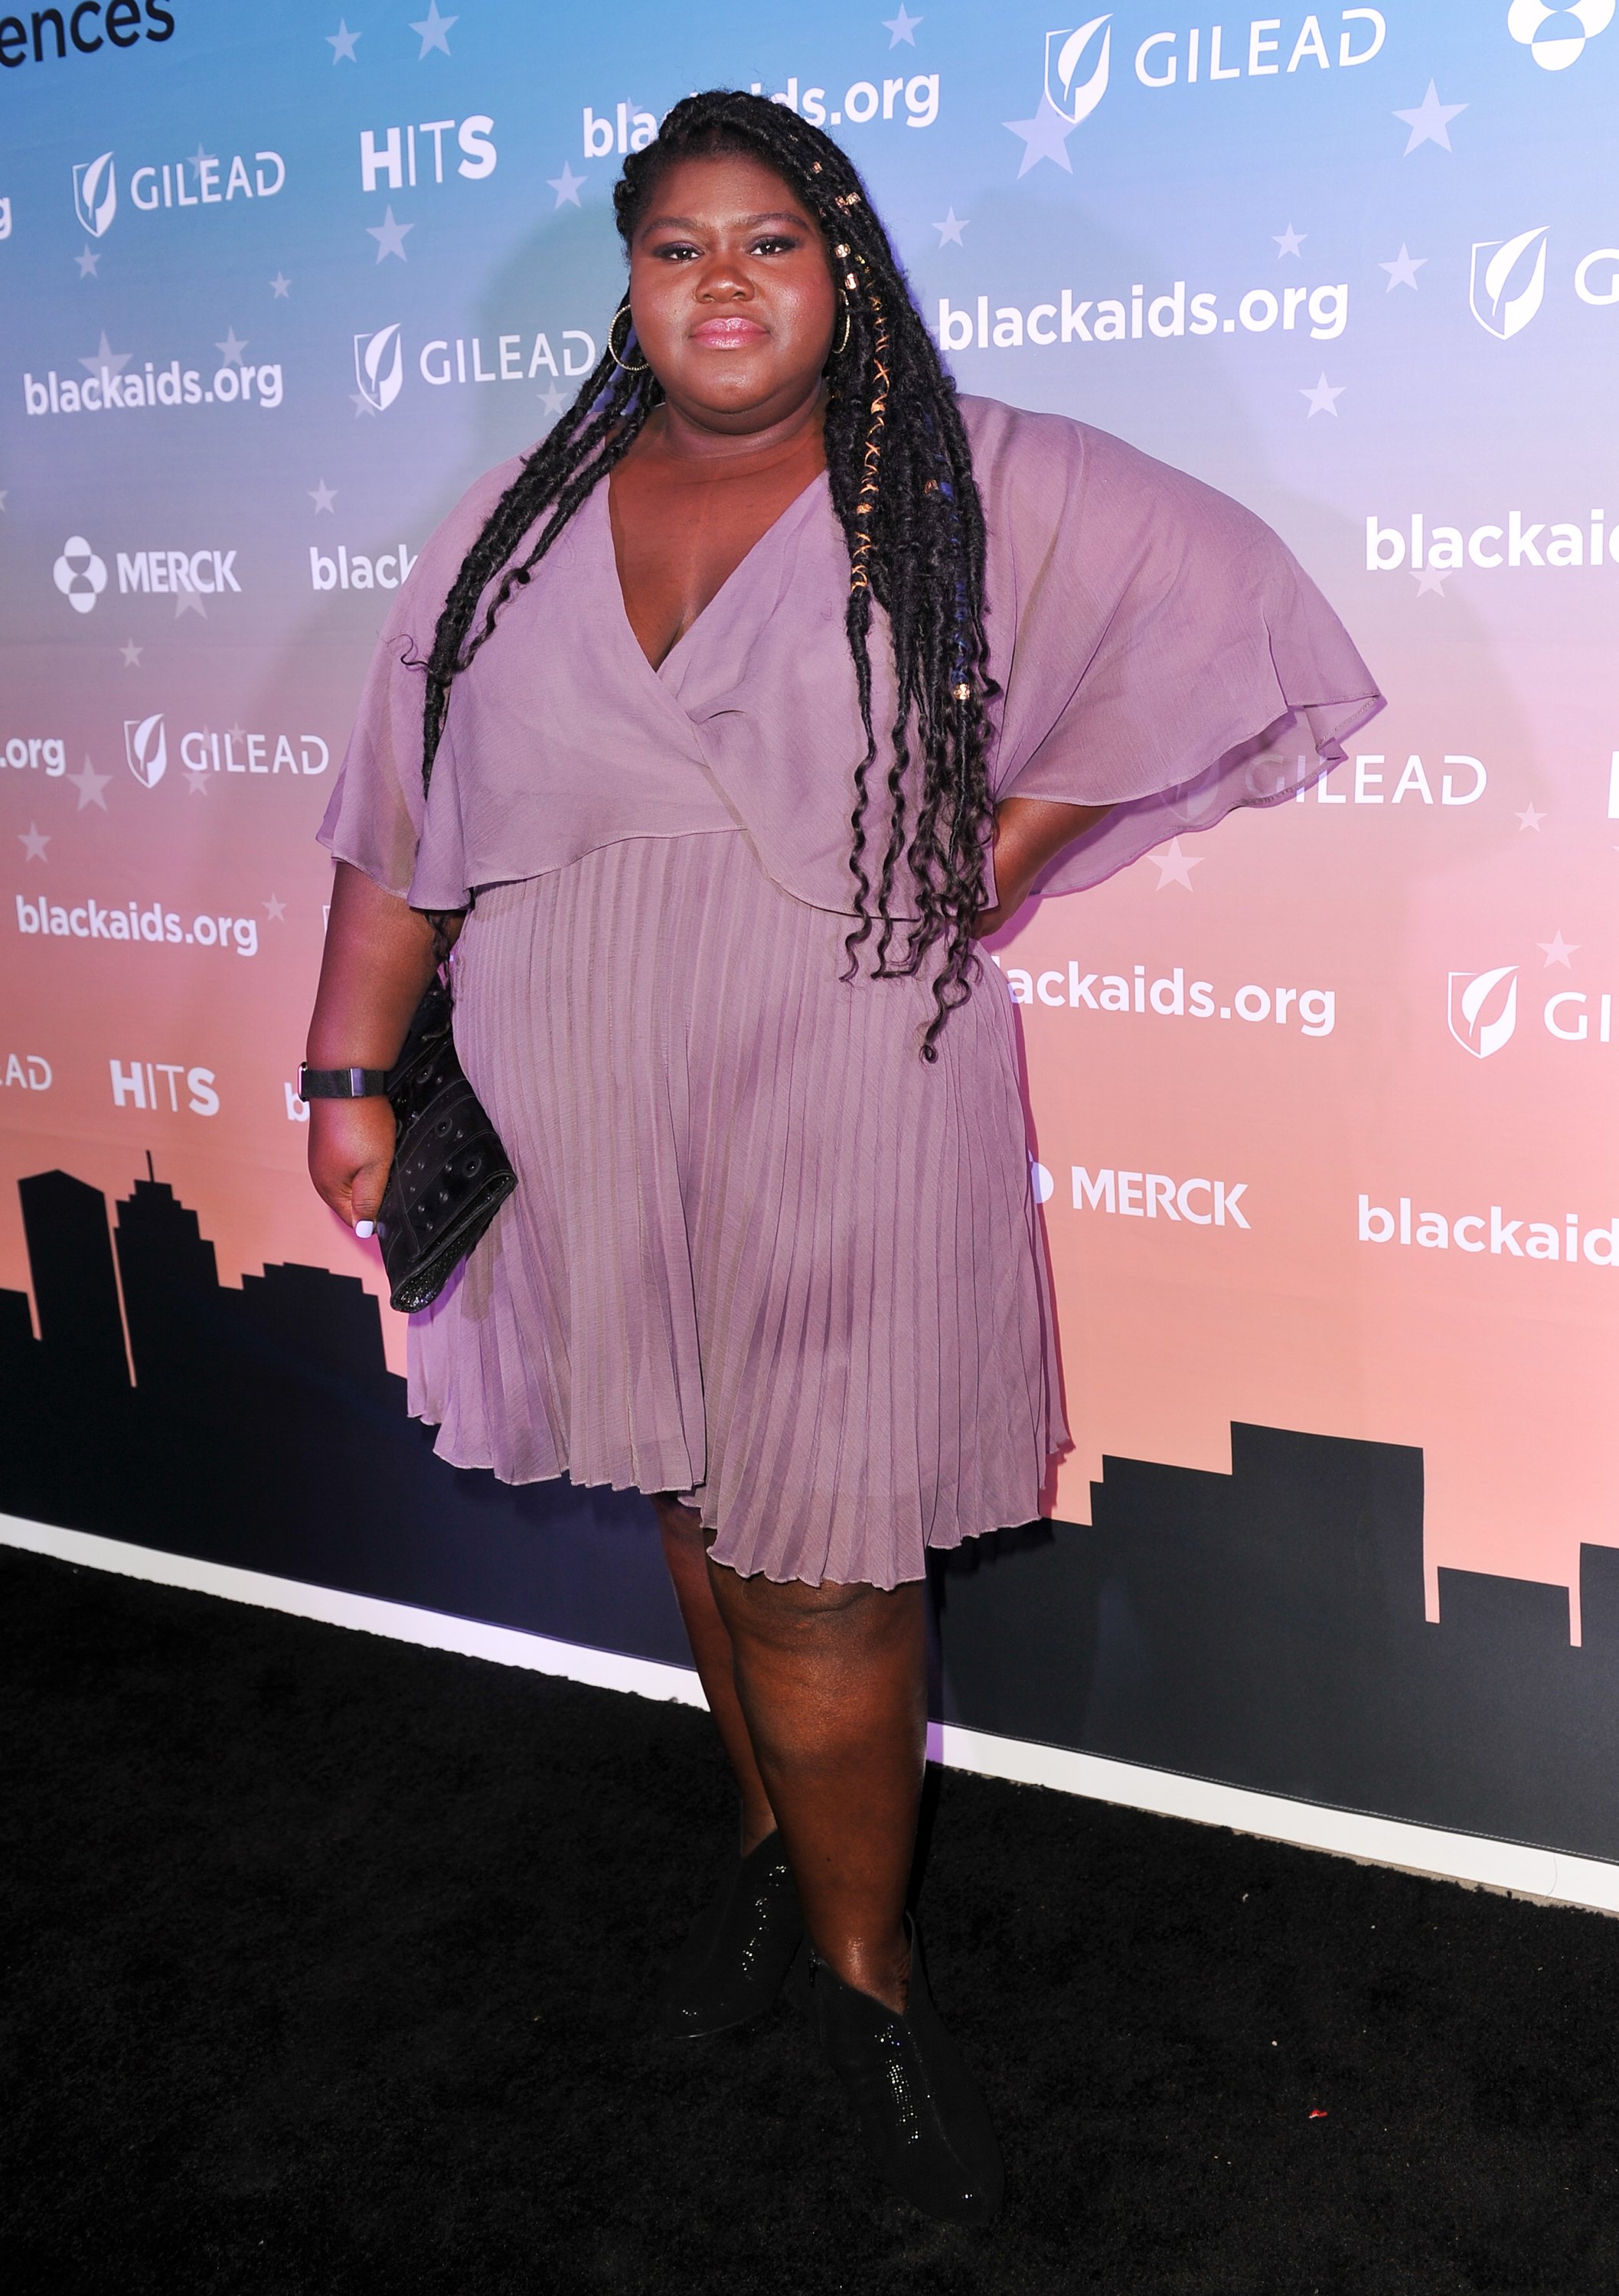 Gabourey Sidibe attends the Black AIDS Institute's 2018 Heroes in The Struggle Gala at California African American Museum in Los Angeles on December 01, 2018 | Photo: Getty Images